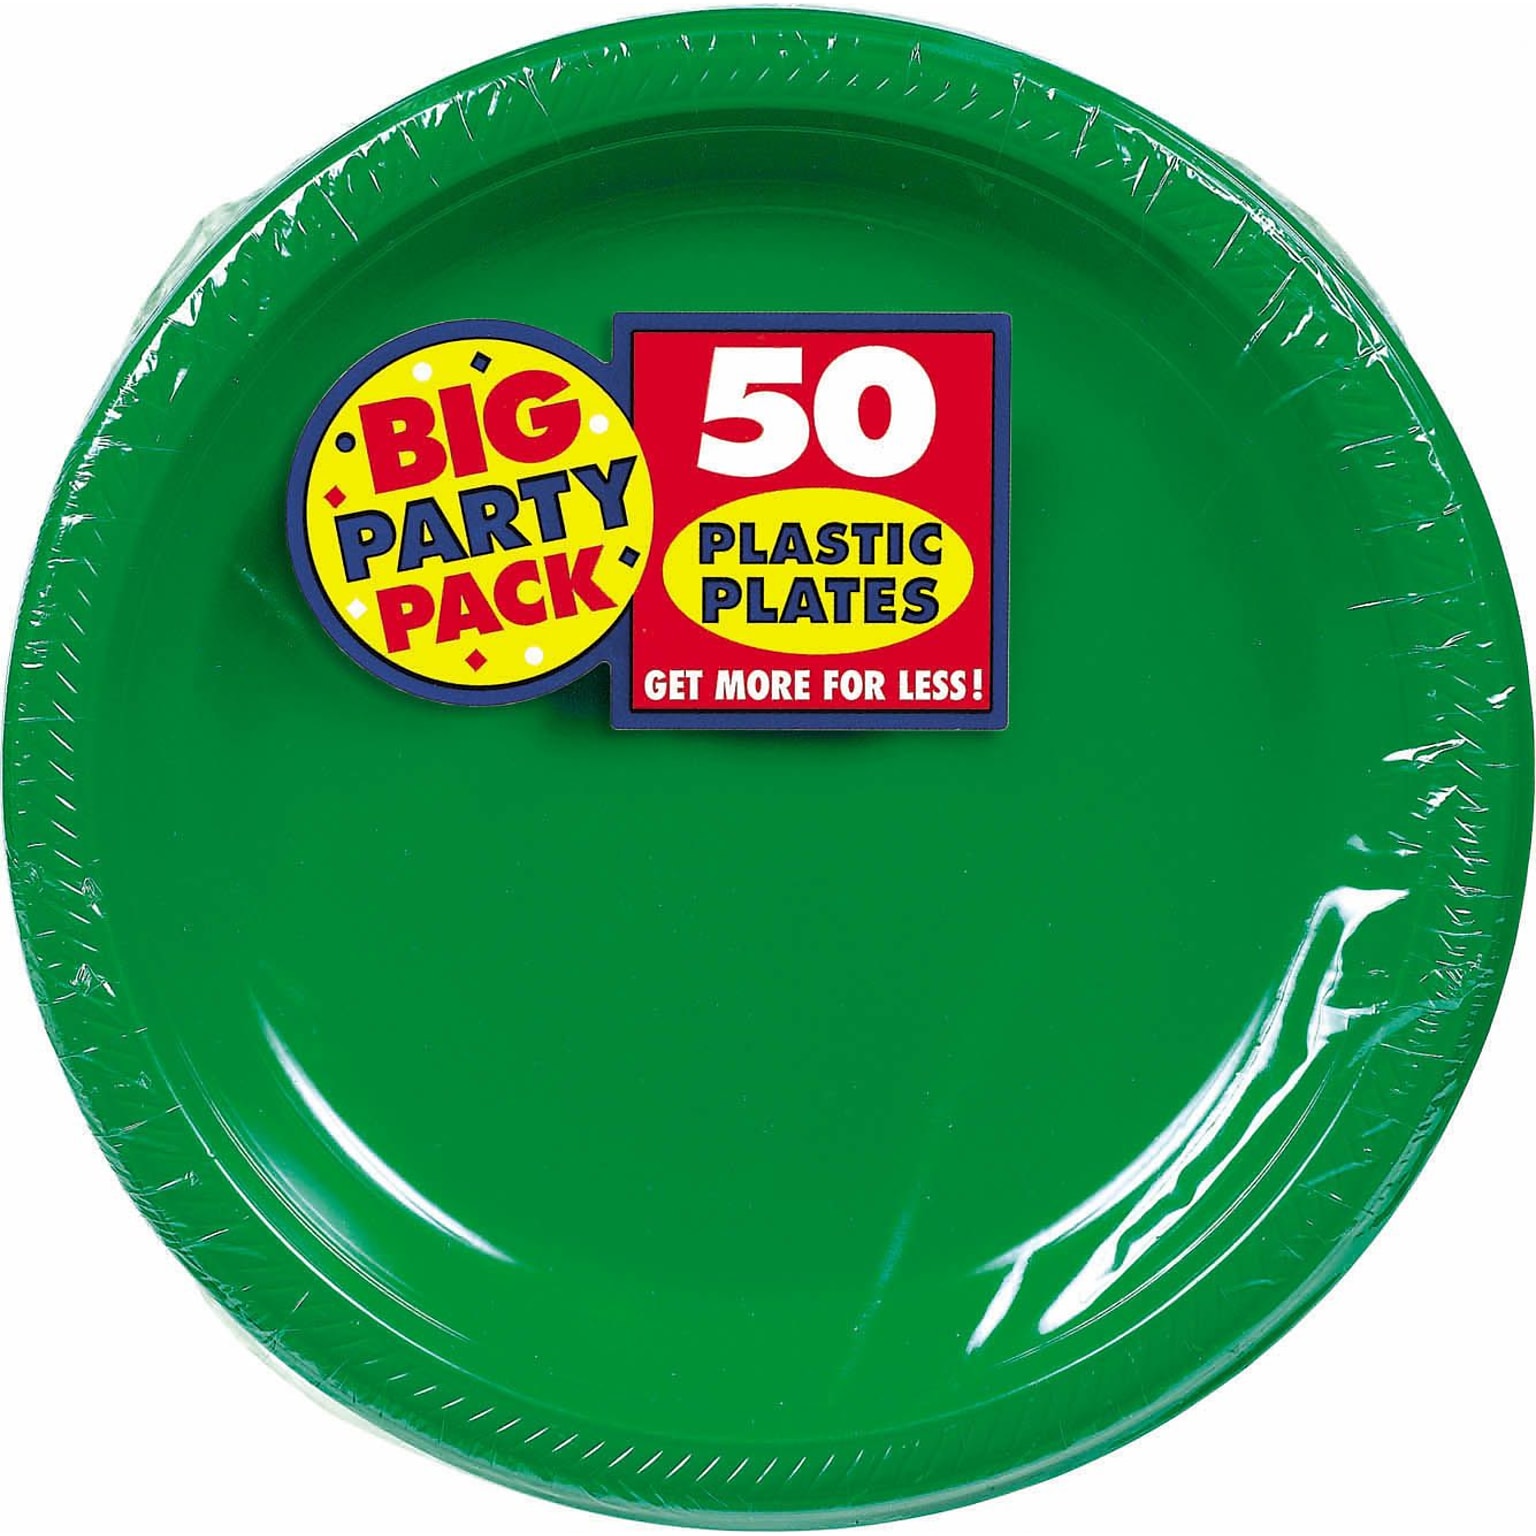 Amscan Big Party Pack 10.25 Green Round Plastic Plate, 2/Pack, 50 Per Pack (630732.03)